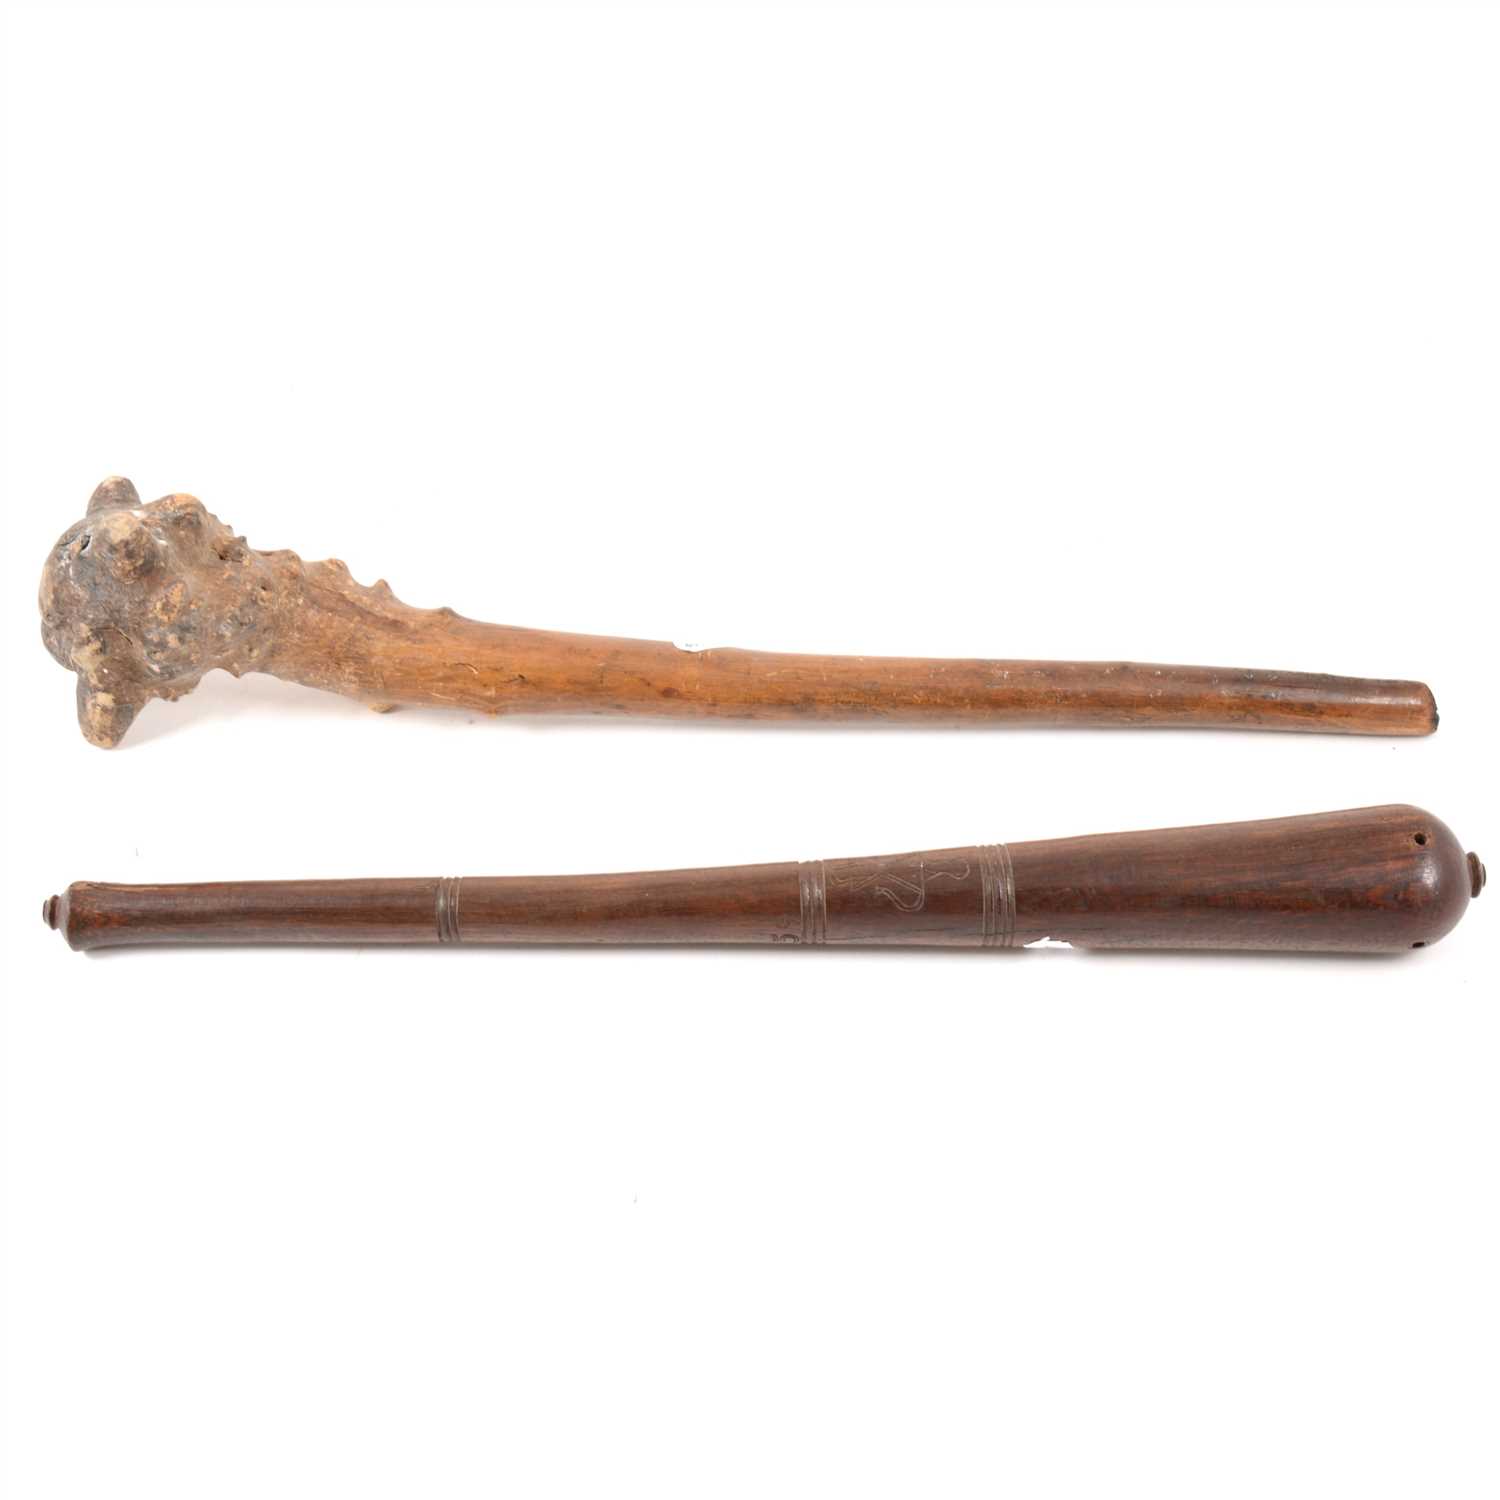 Lot 84 - Colonial hardwood truncheon, dated 1959, and another wooden club.